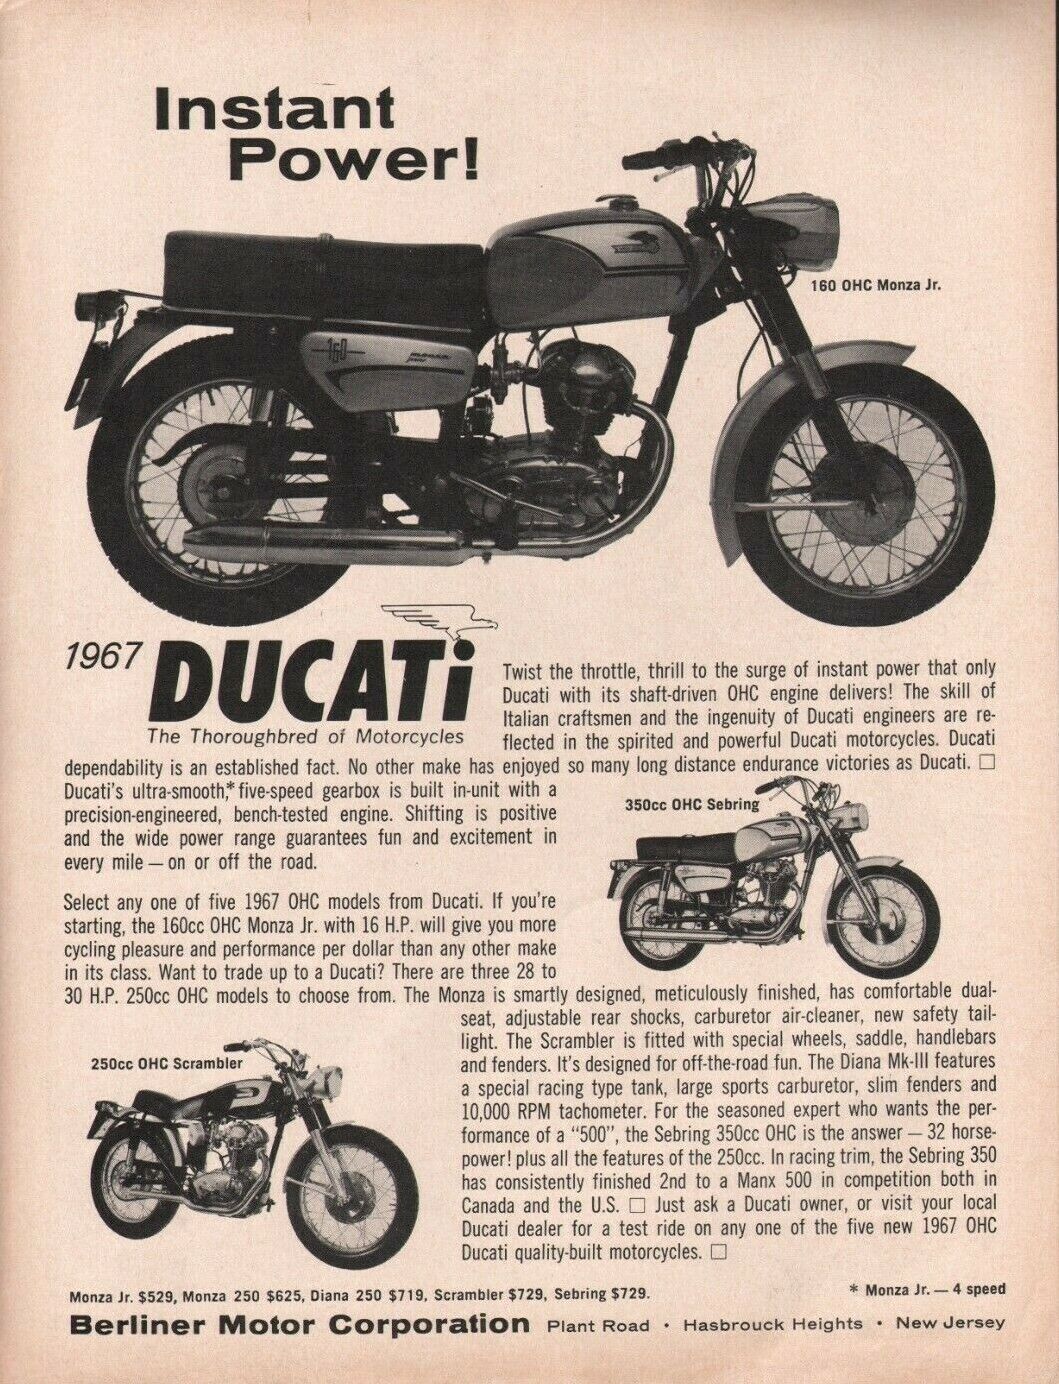 1967 Ducati - The Thoroughbred of Motorcycles - Vintage Motorcycle Ad